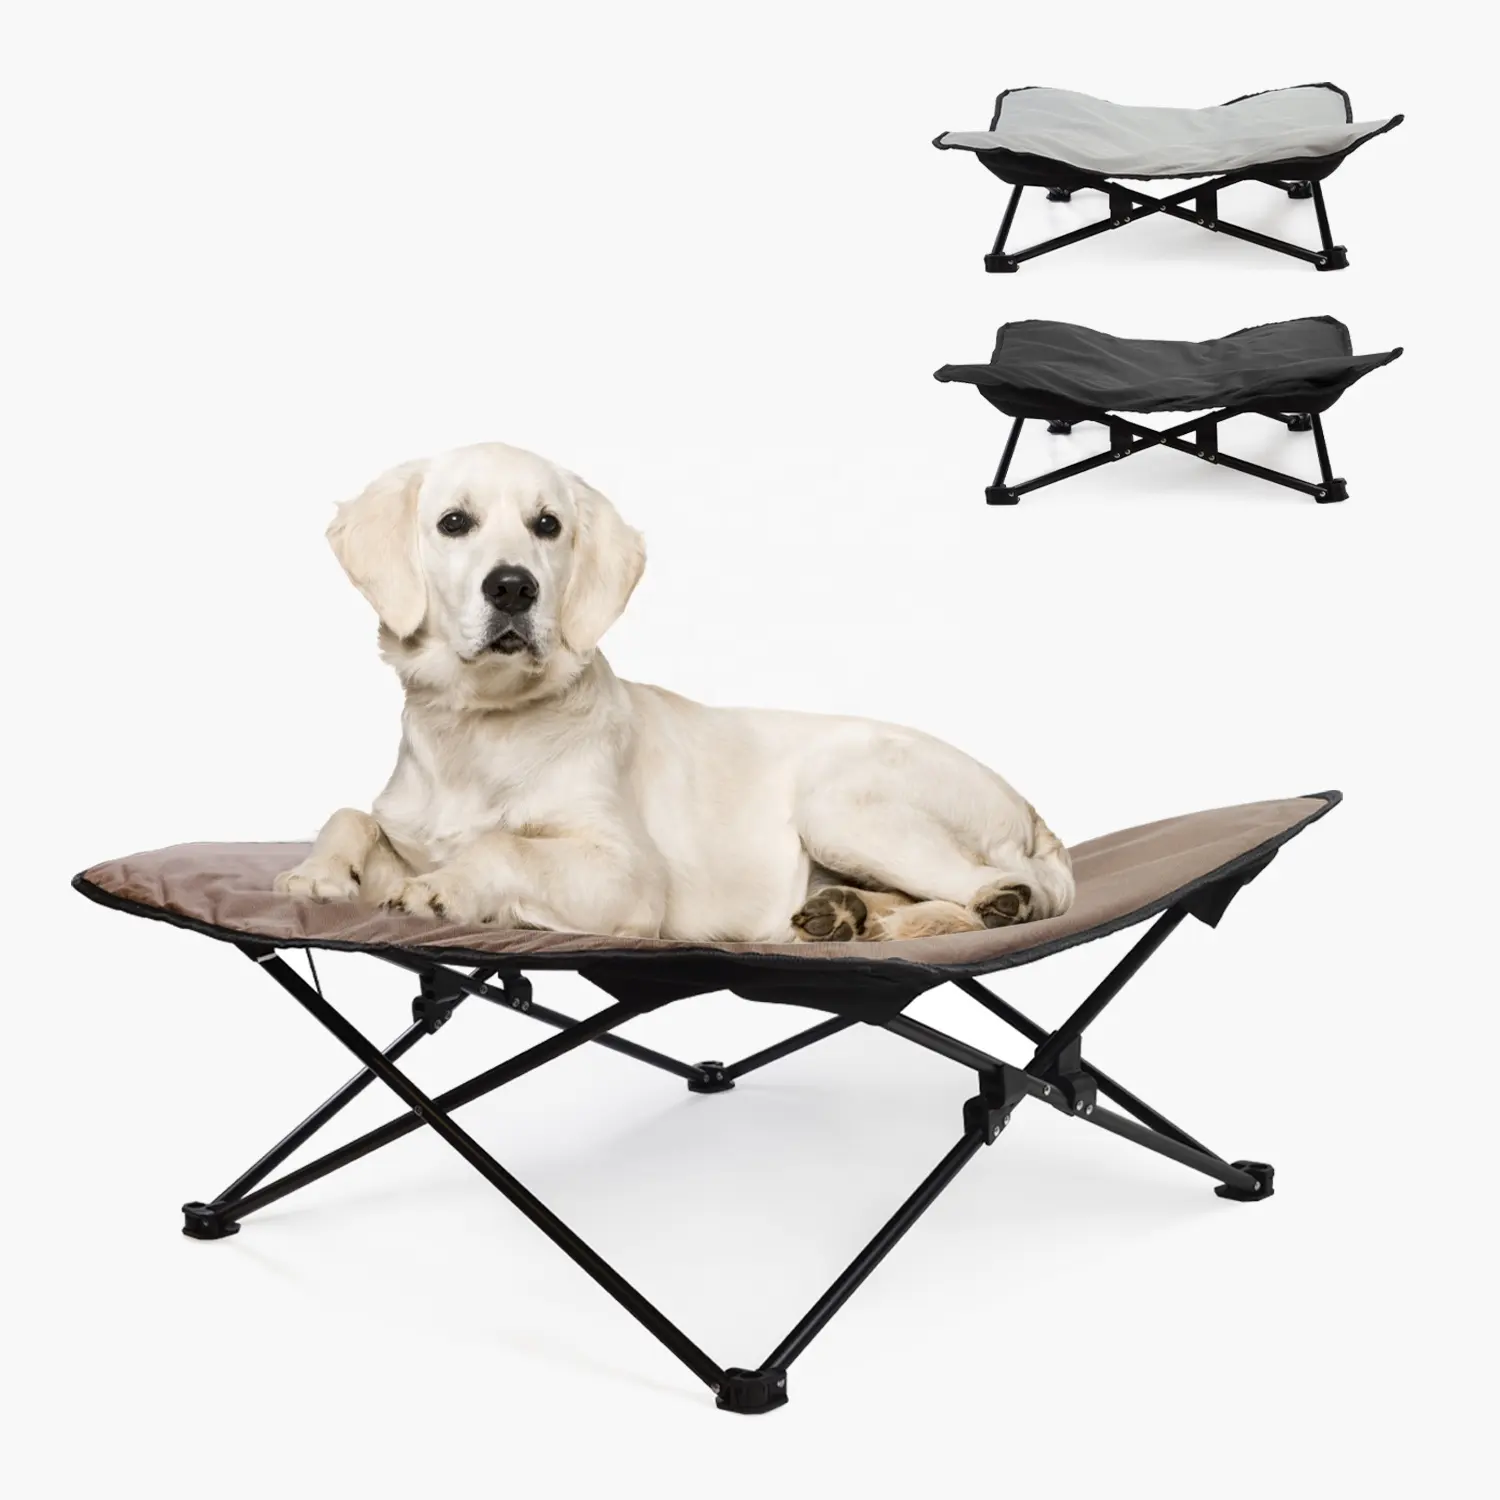 Folding Elevated Dog Bed Indoor Outdoor Pet Camping Raised Cot for Small Medium or Large Dogs